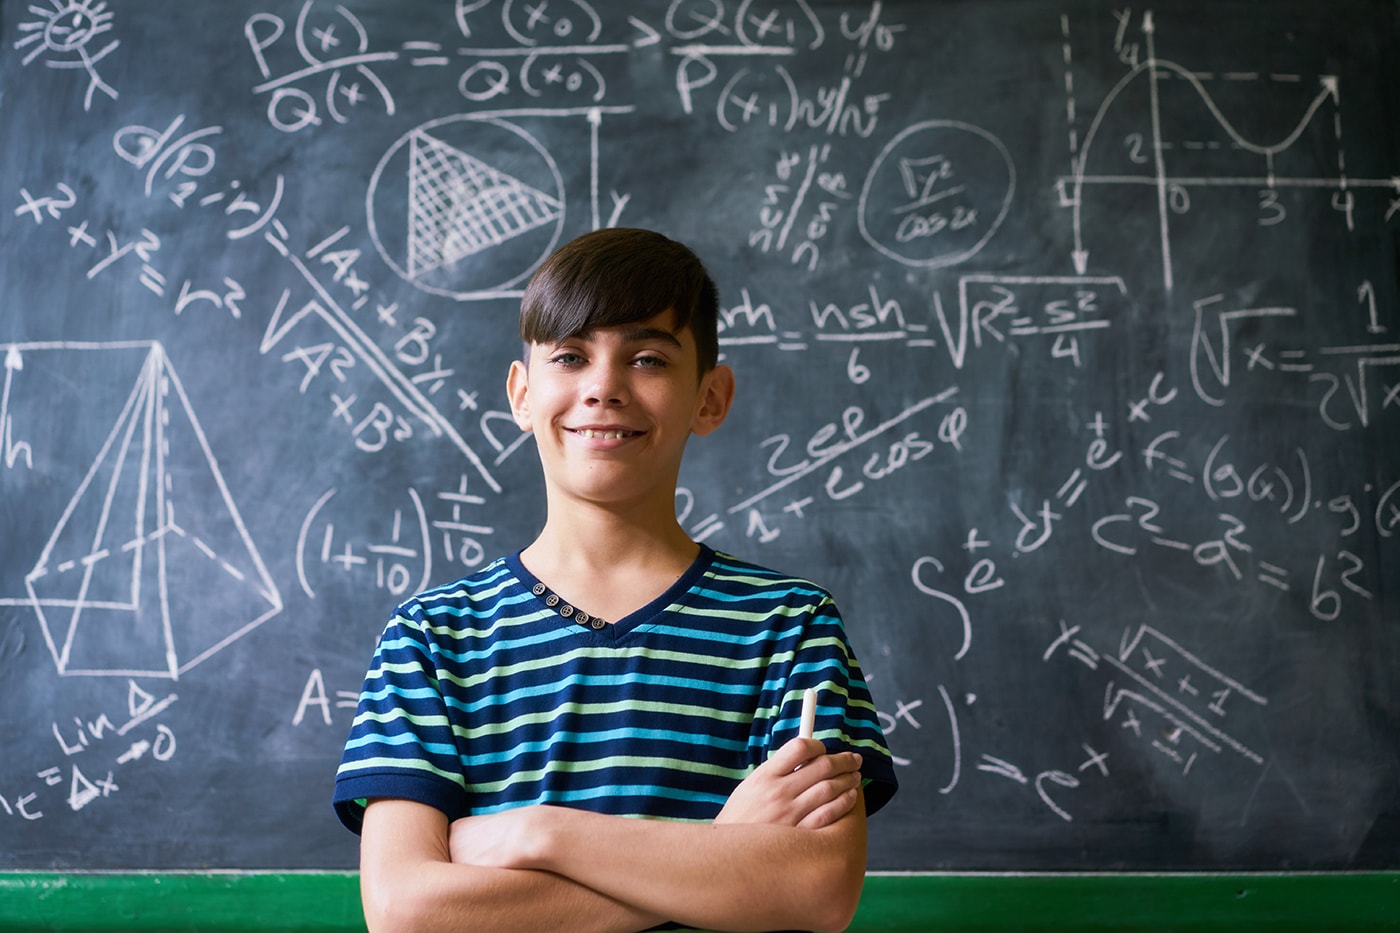 Smart boy in front of blackboard with equations